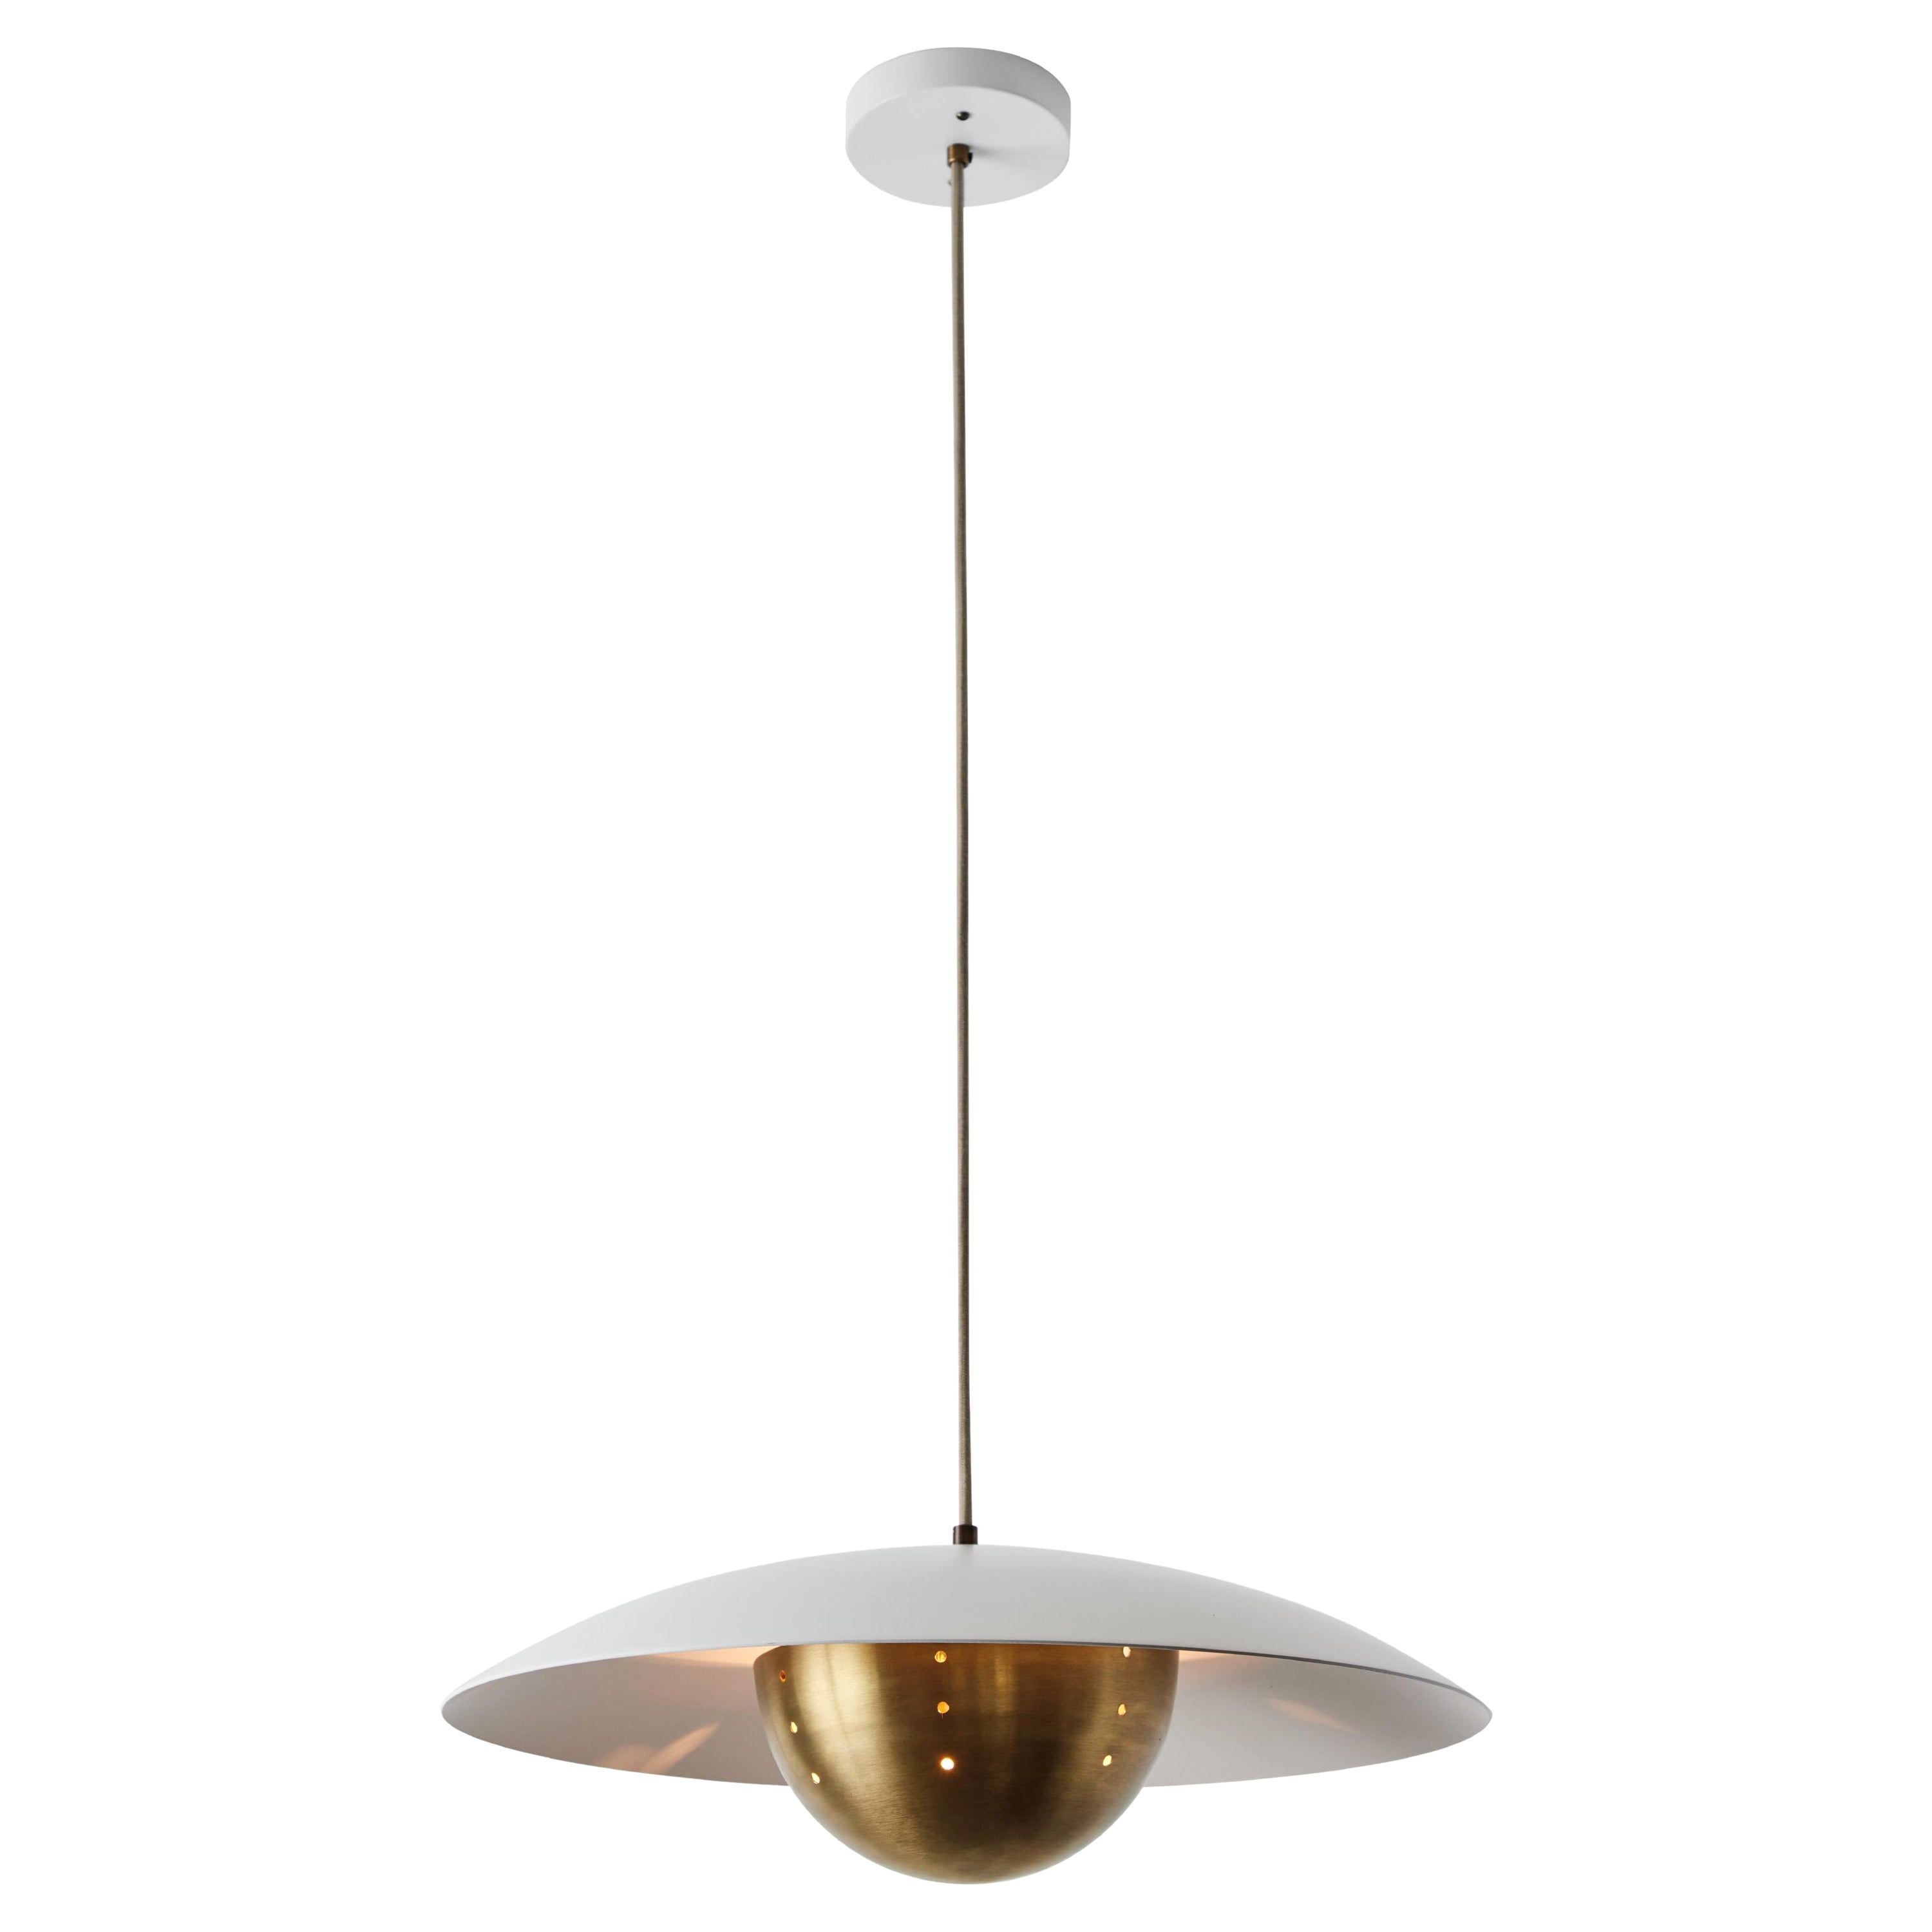 'Gabi' Perforated Brass Dome & White Painted Metal Pendant by Alvaro Benitez For Sale